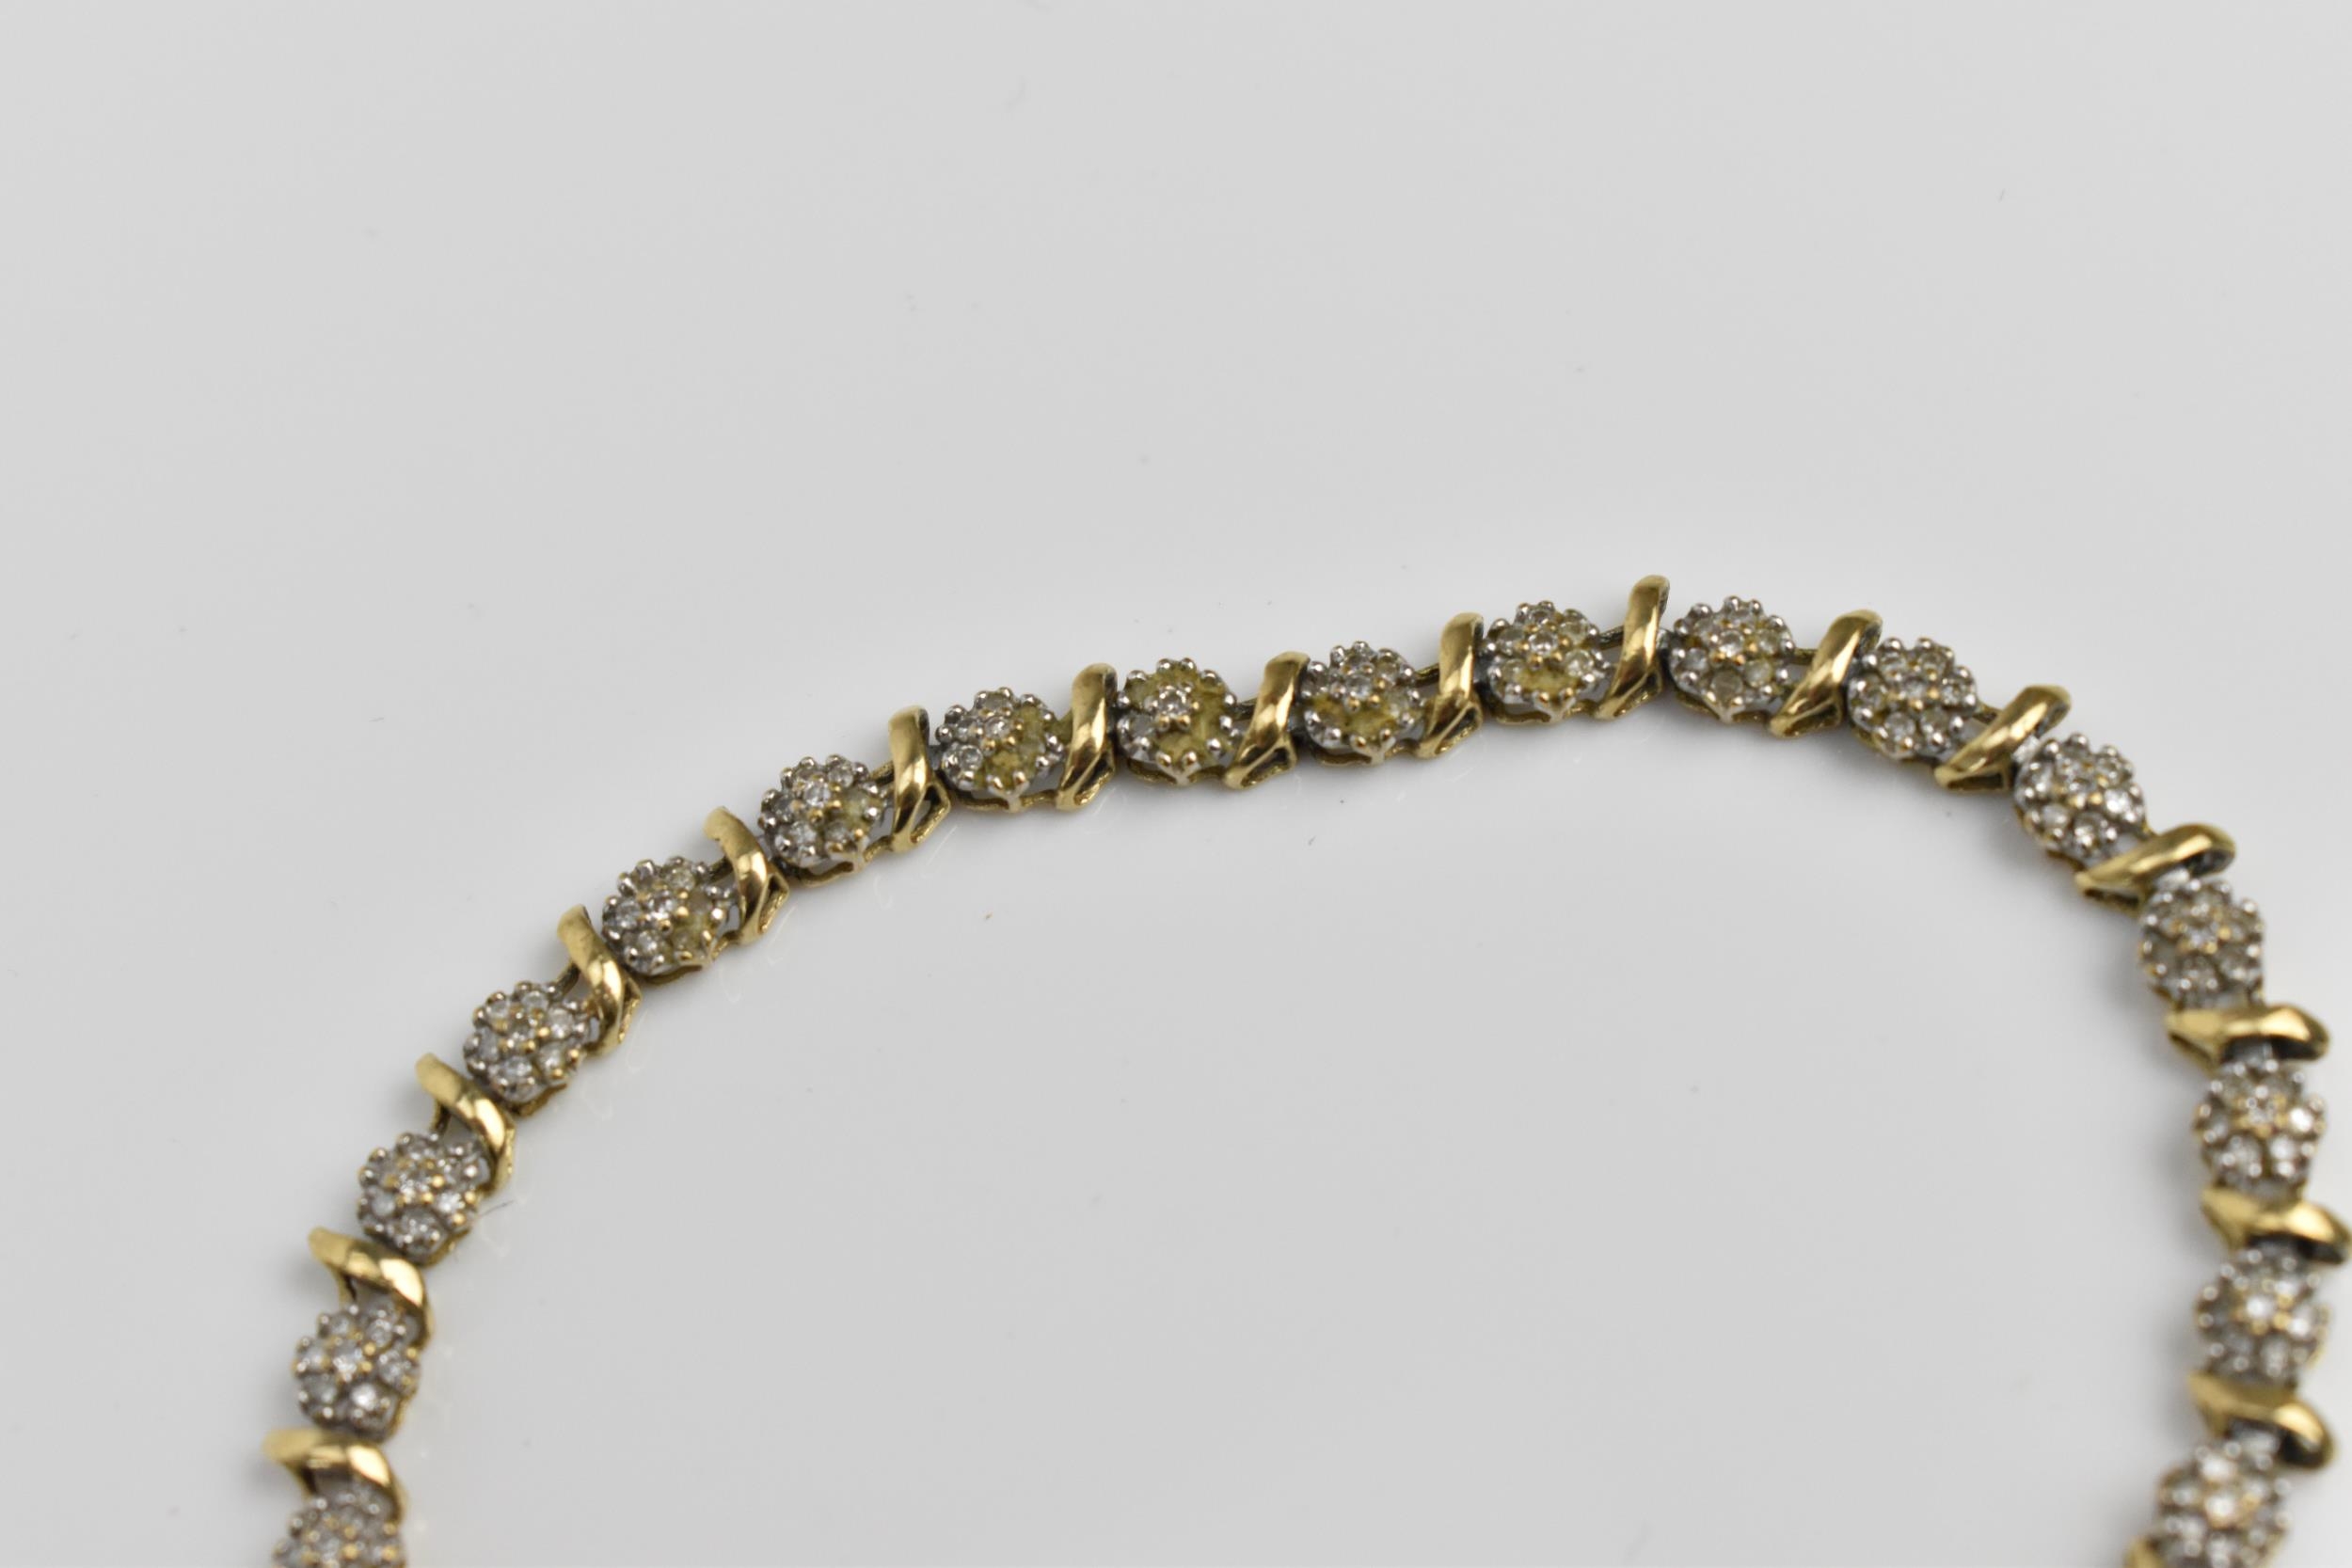 A 9ct yellow gold and diamond bracelet, designed with twenty-seven floral diamond clusters, with - Image 5 of 7